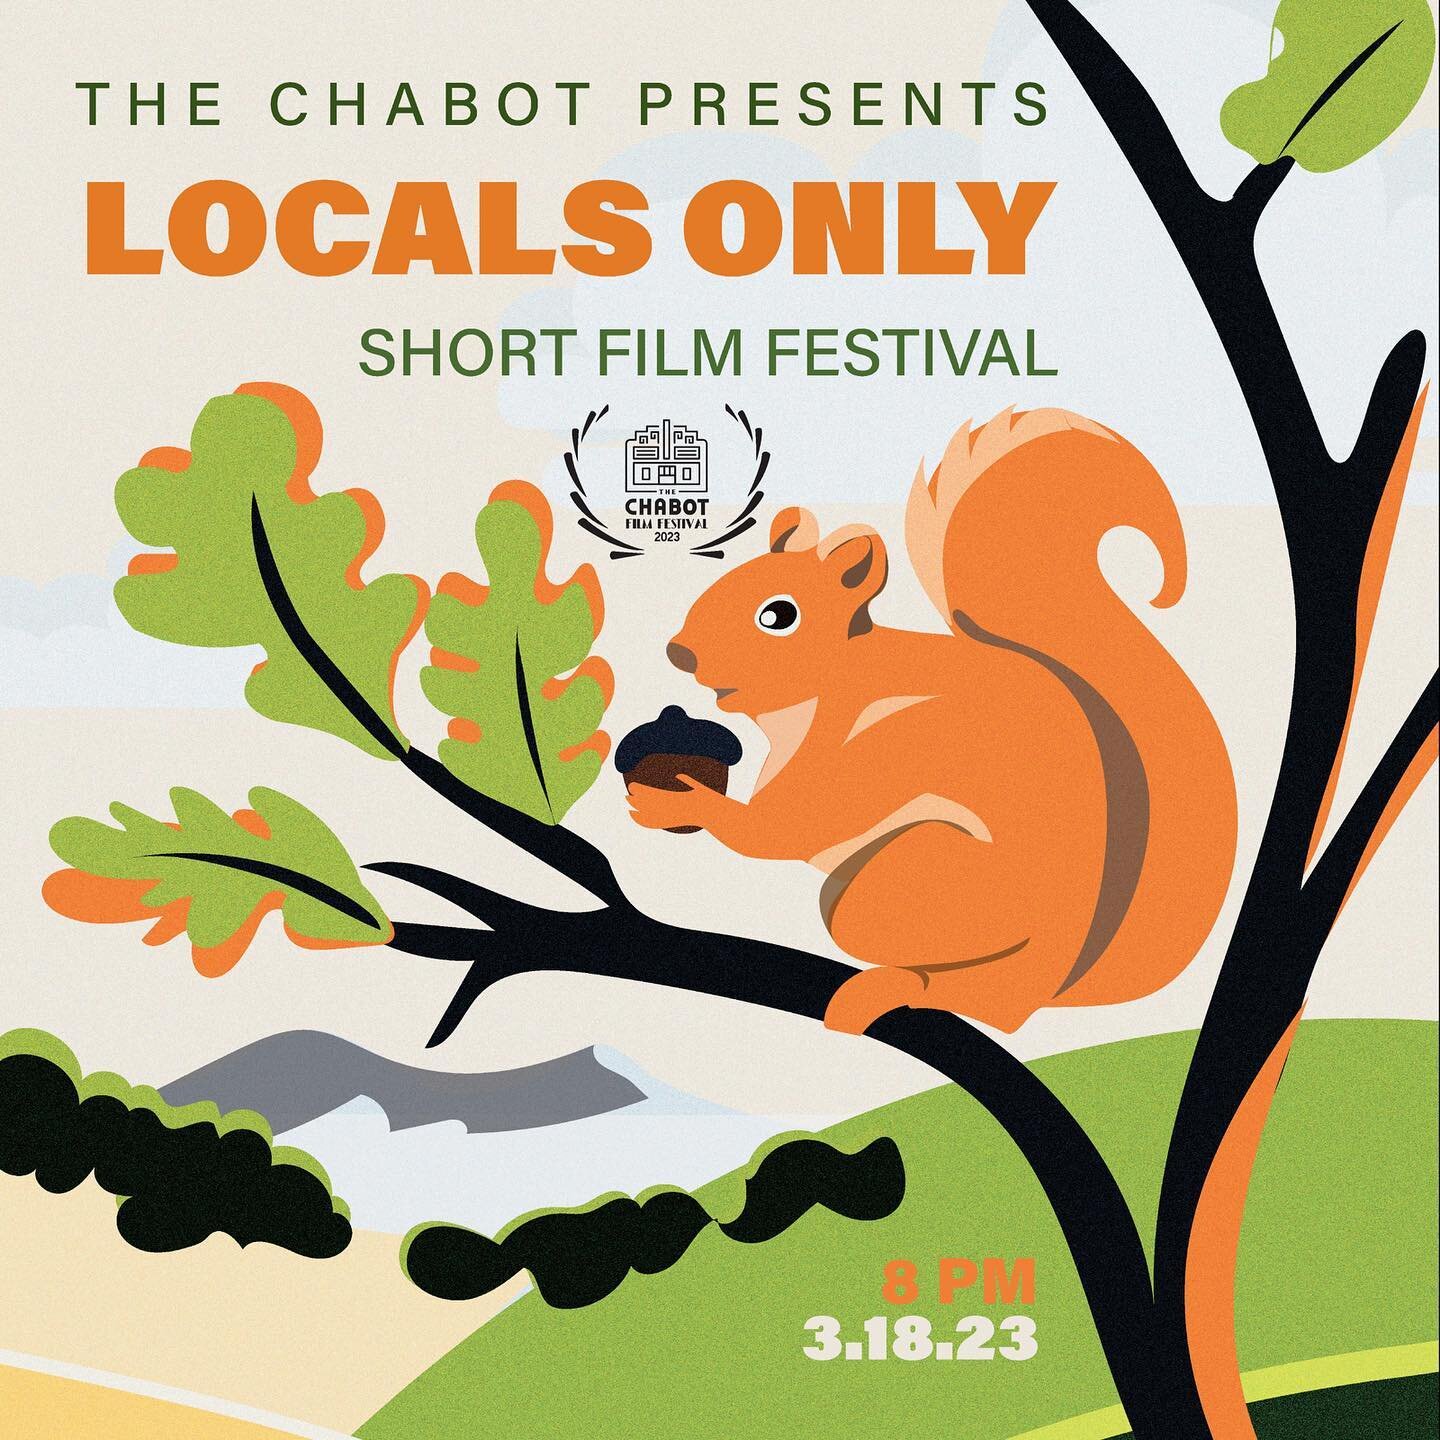 It&rsquo;s back! 2023 &ldquo;Locals Only&rdquo; Film Festival 🎬

Join the Chabot Theater for our second annual red carpet event, showcasing the best short films from filmmakers in the SF &amp; East Bay Area. Our goal is to encourage artists and intr